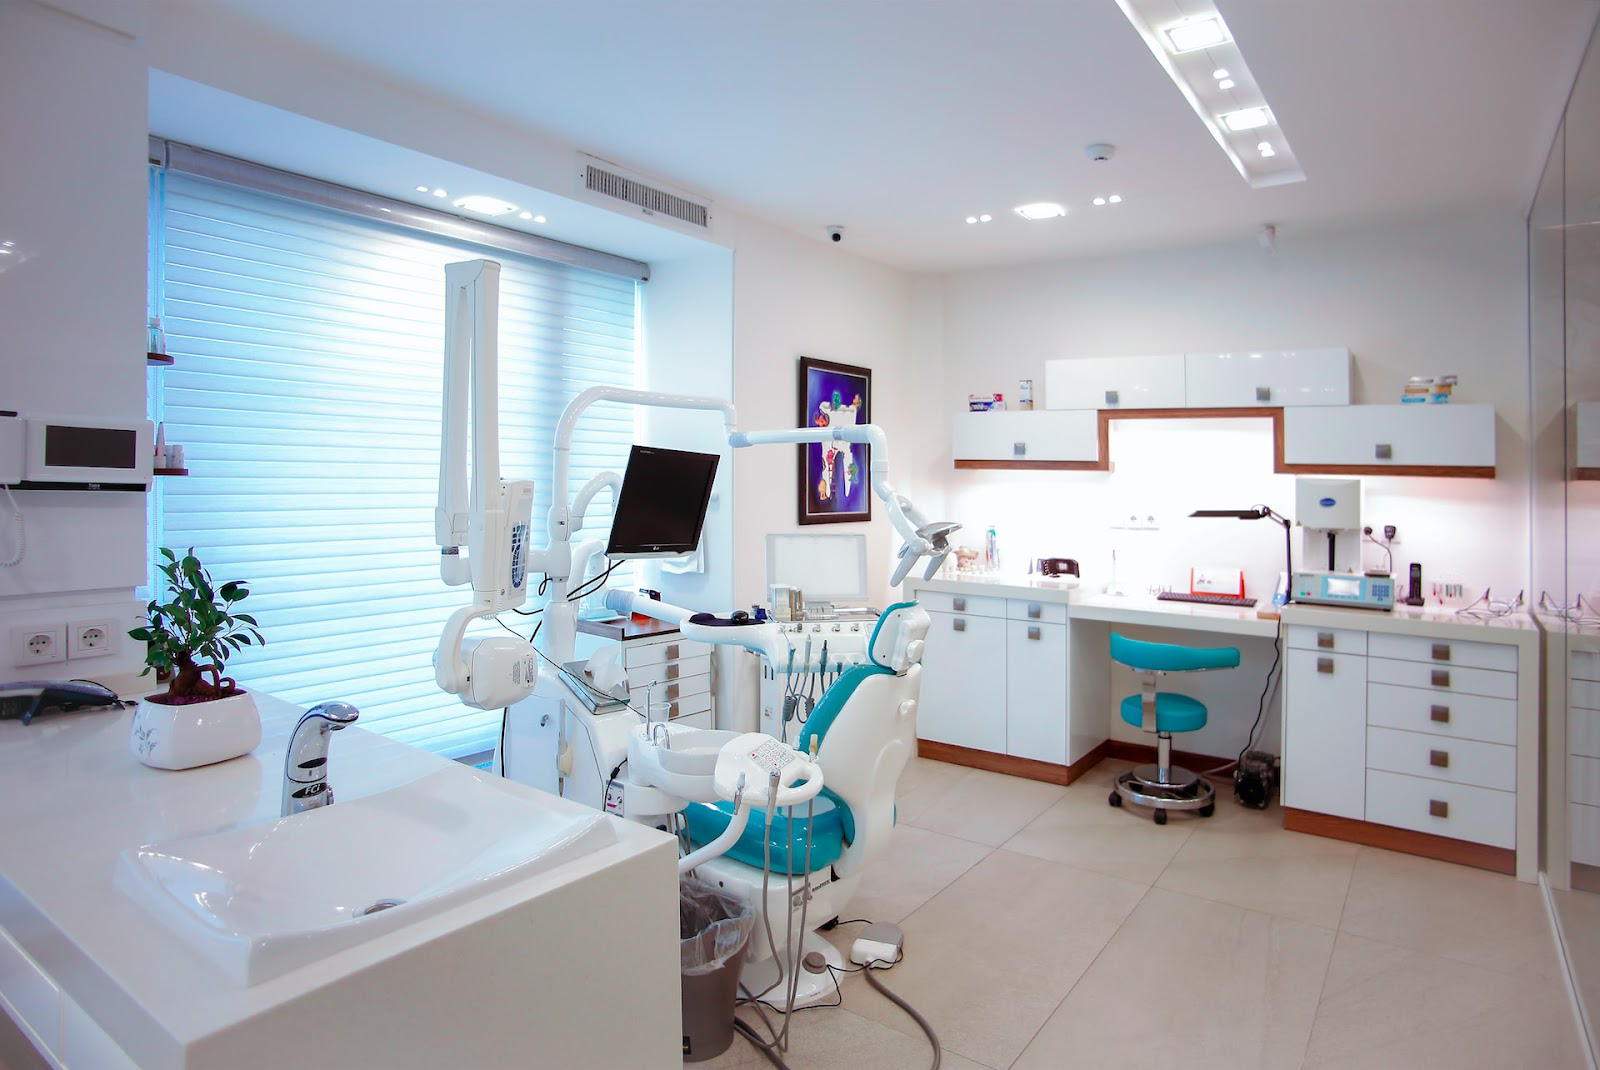 5 Qualities of a Great Dental Office